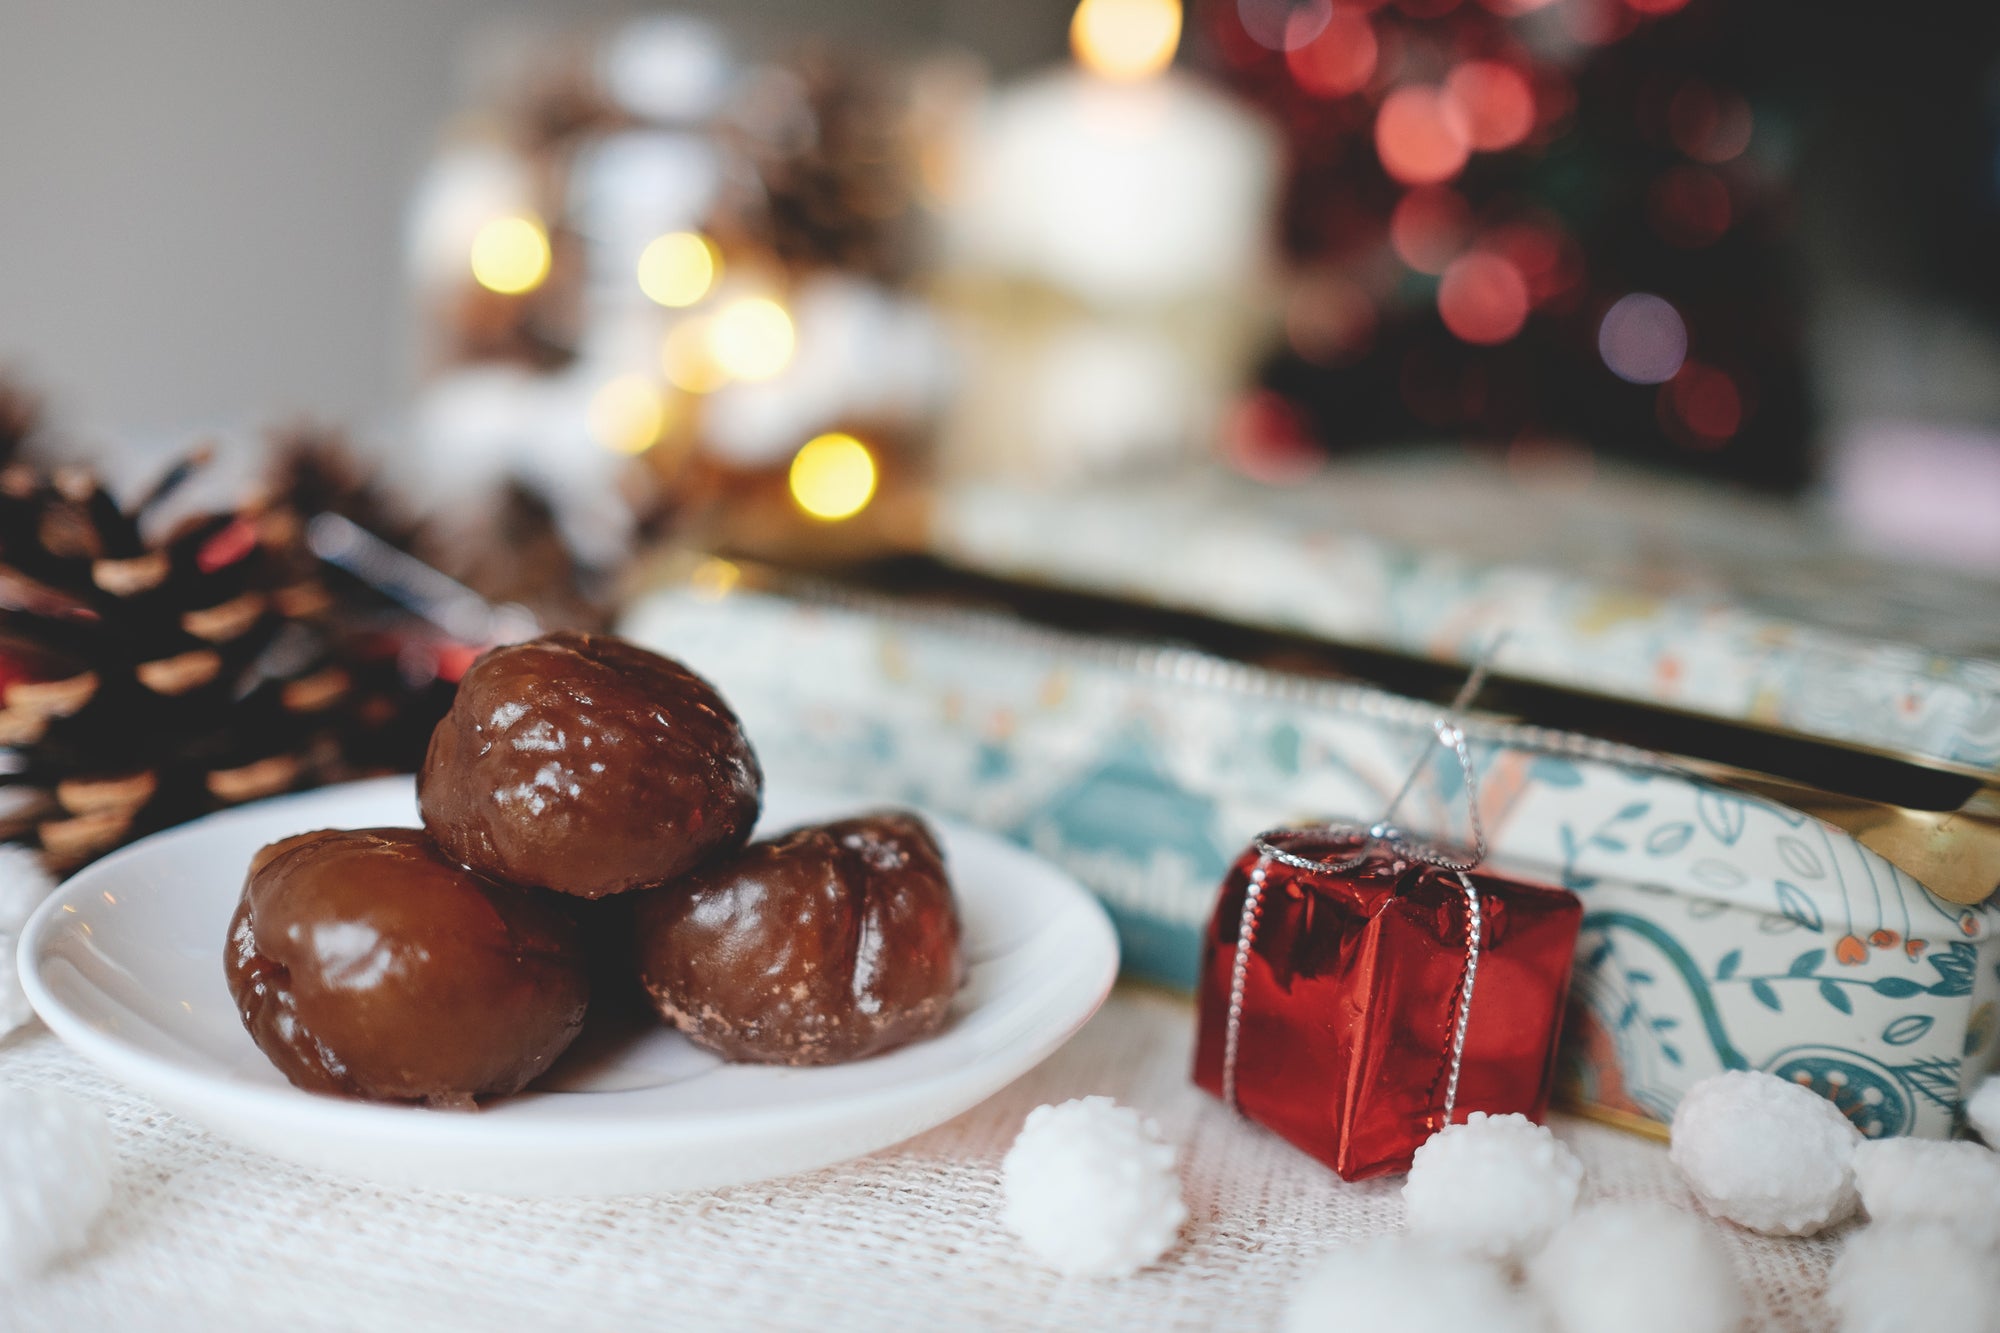 How To Make Your Own Marrons Glacés